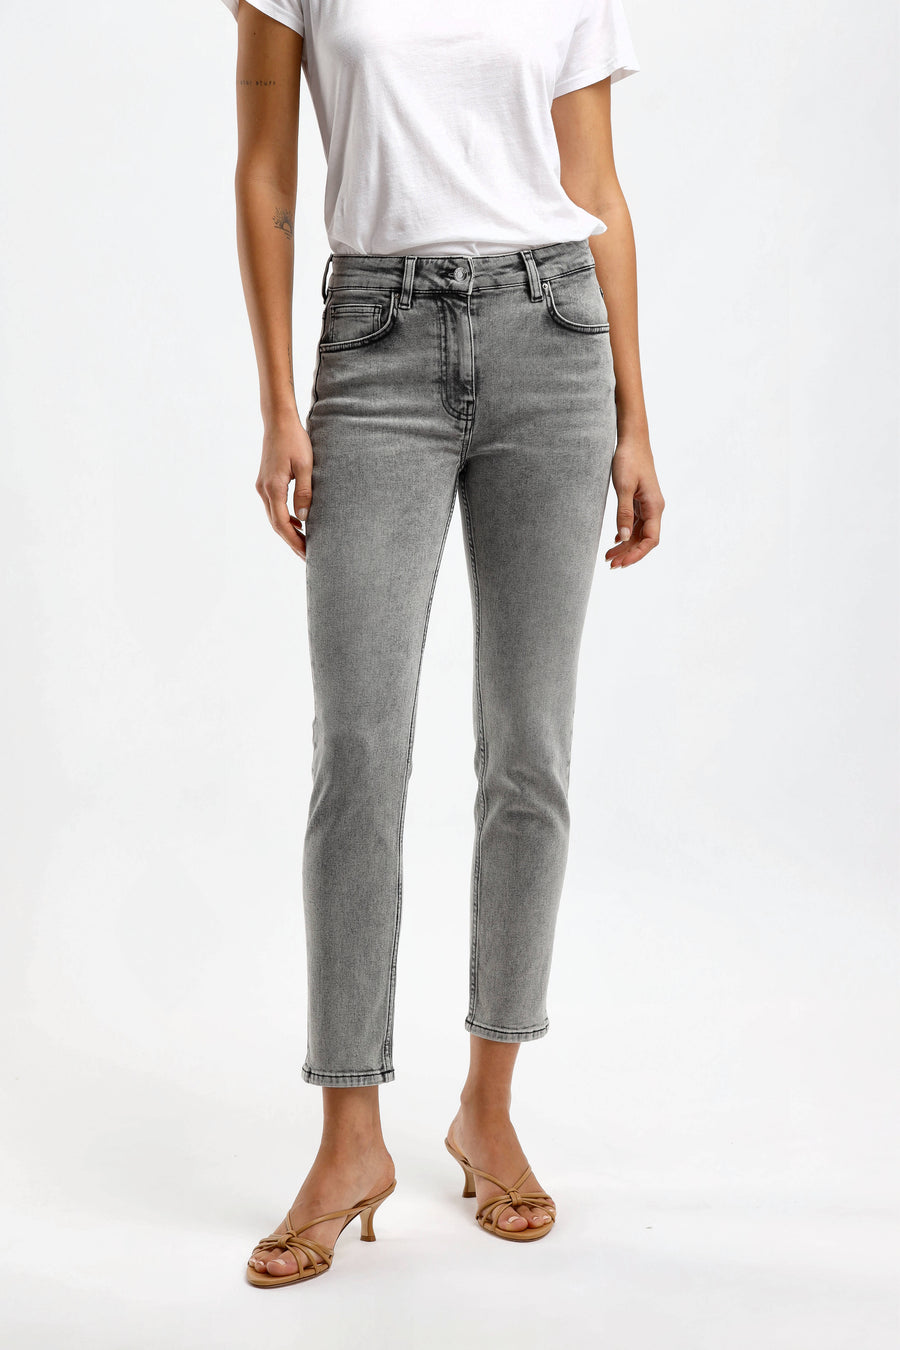 Jeans Galloway in Used GreyIRO - Anita Hass